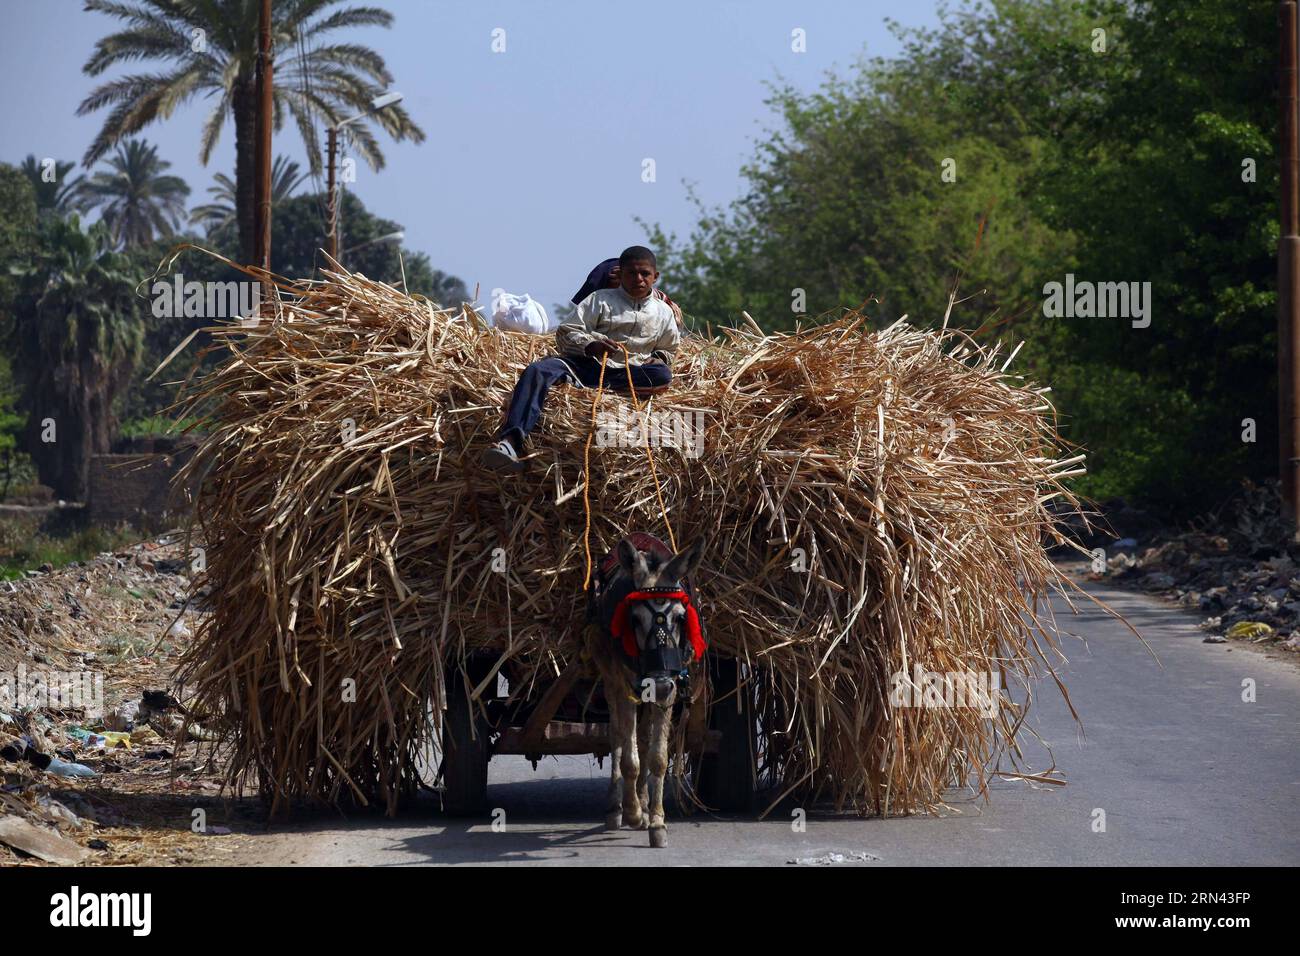 (150504) -- FAYOUM, May 4, 2015 -- An Egyptian farmer works at a wheat field in the village of Deska, Fayoum, about 130 kilometers south-west to Cairo, Egypt, on May 4, 2015. Egypt s wheat crop will reach 10 million tons this season and the Egyptian government has developed a plan for the production of wheat to satisfy over 80% of its domestic need by 2030. Egypt is the world s largest wheat importer, which usually purchases around 10 million tons of wheat per year from international markets and uses a mixture of domestic and imported wheat for its subsidized bread program. ) EGYPT-FAYOUM-WHEA Stock Photo